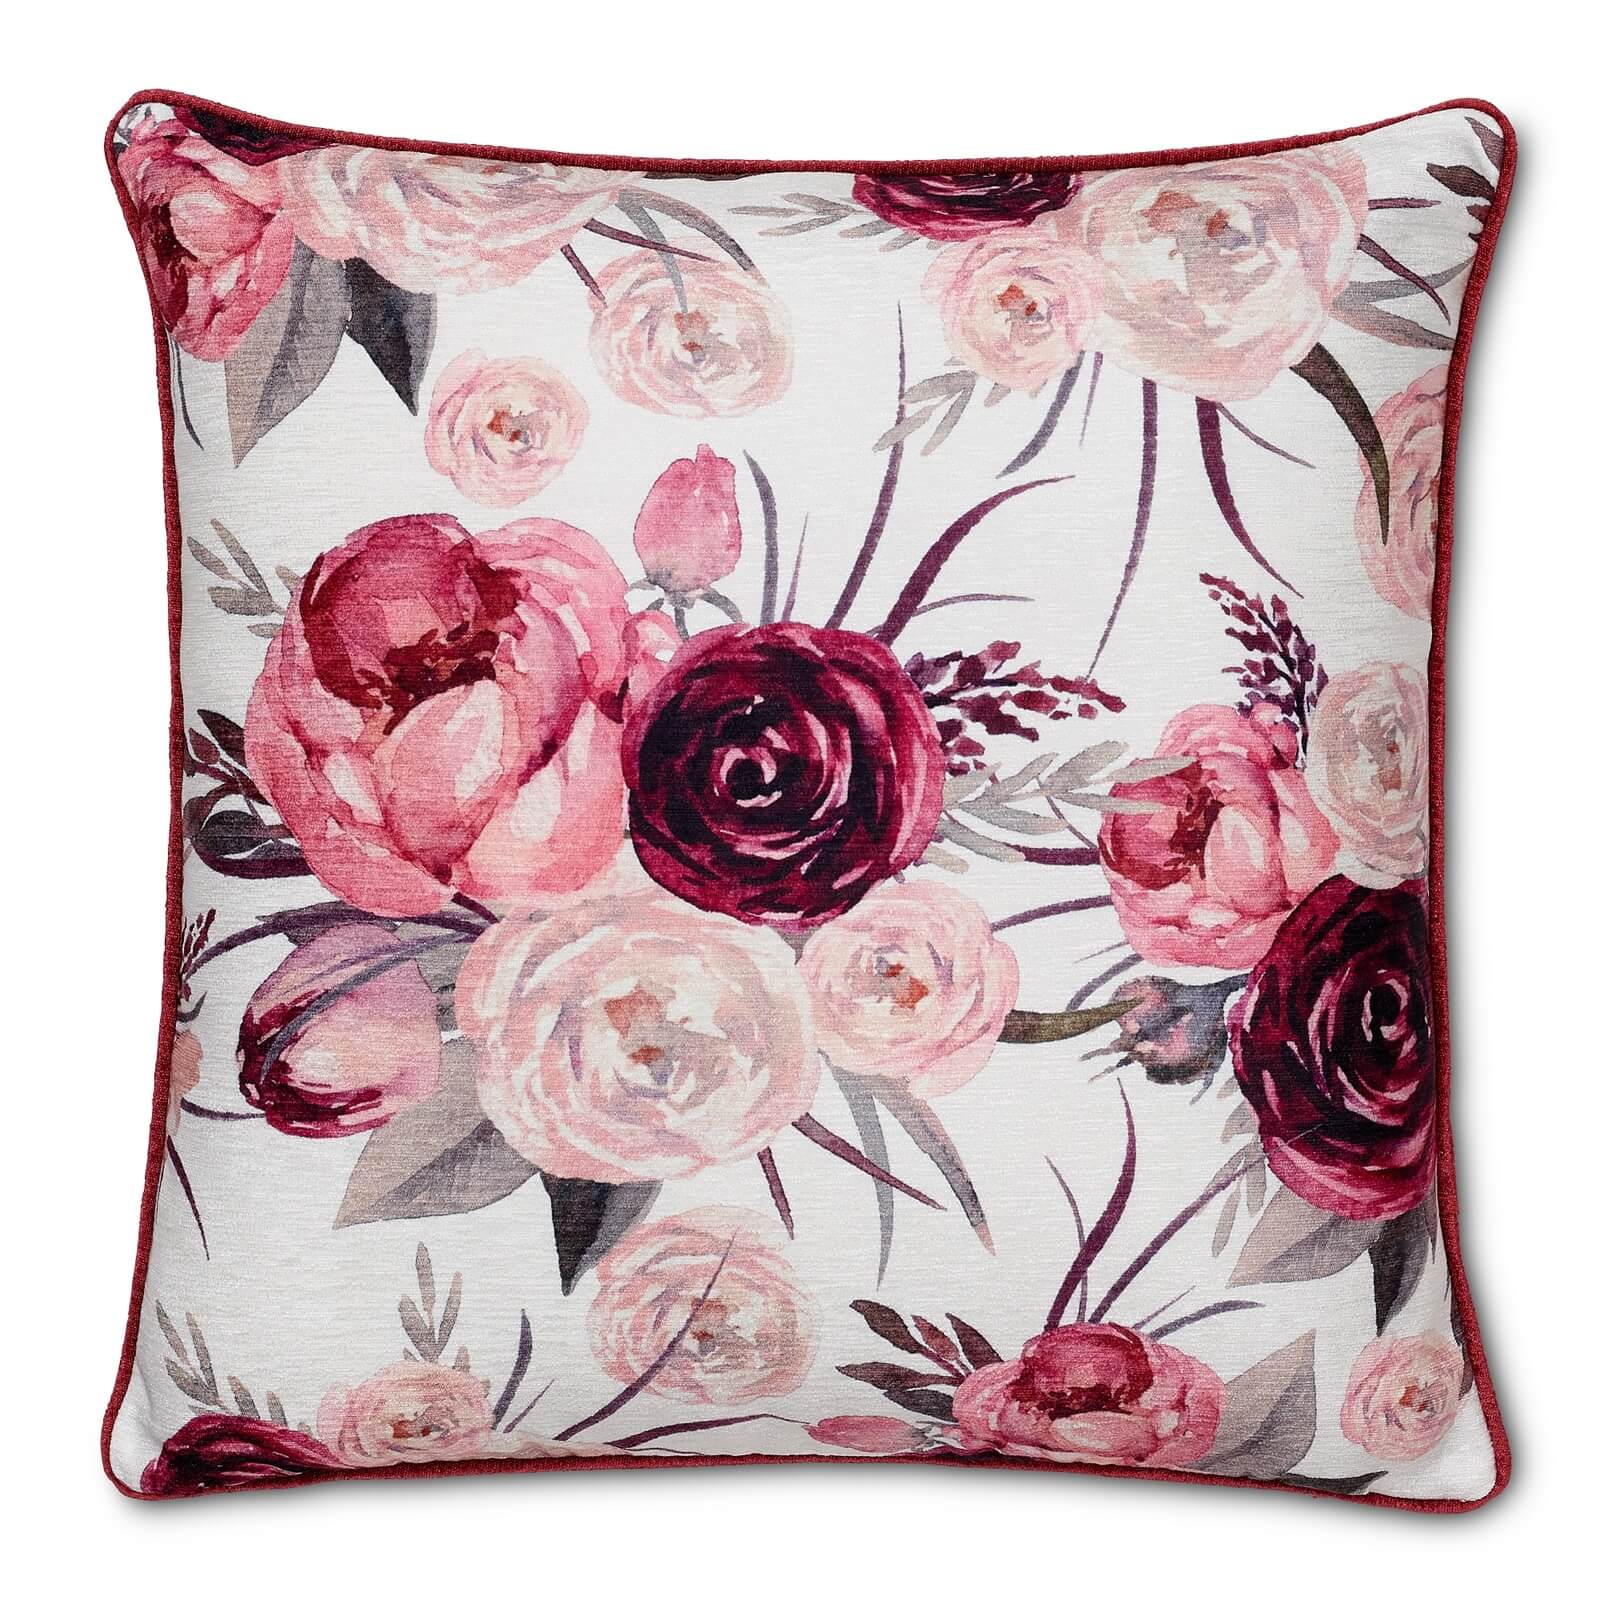 Watercolor Flower Cushion - Red